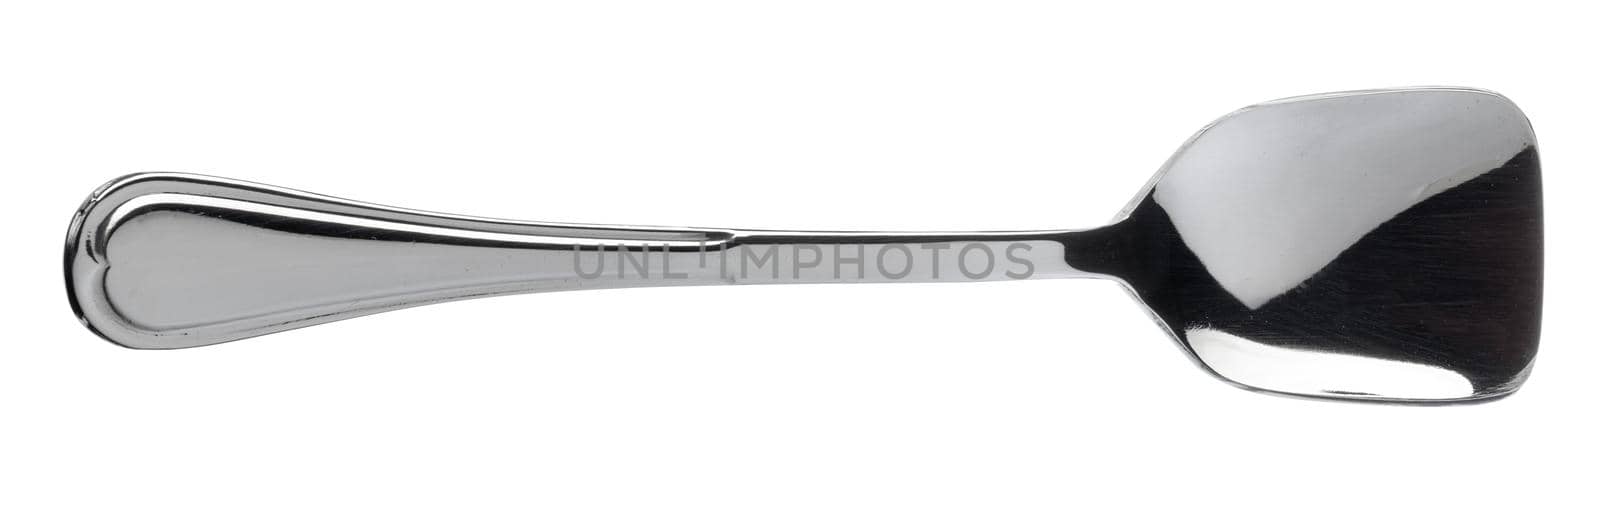 Silver spoon cutlery isolated on white background, top view